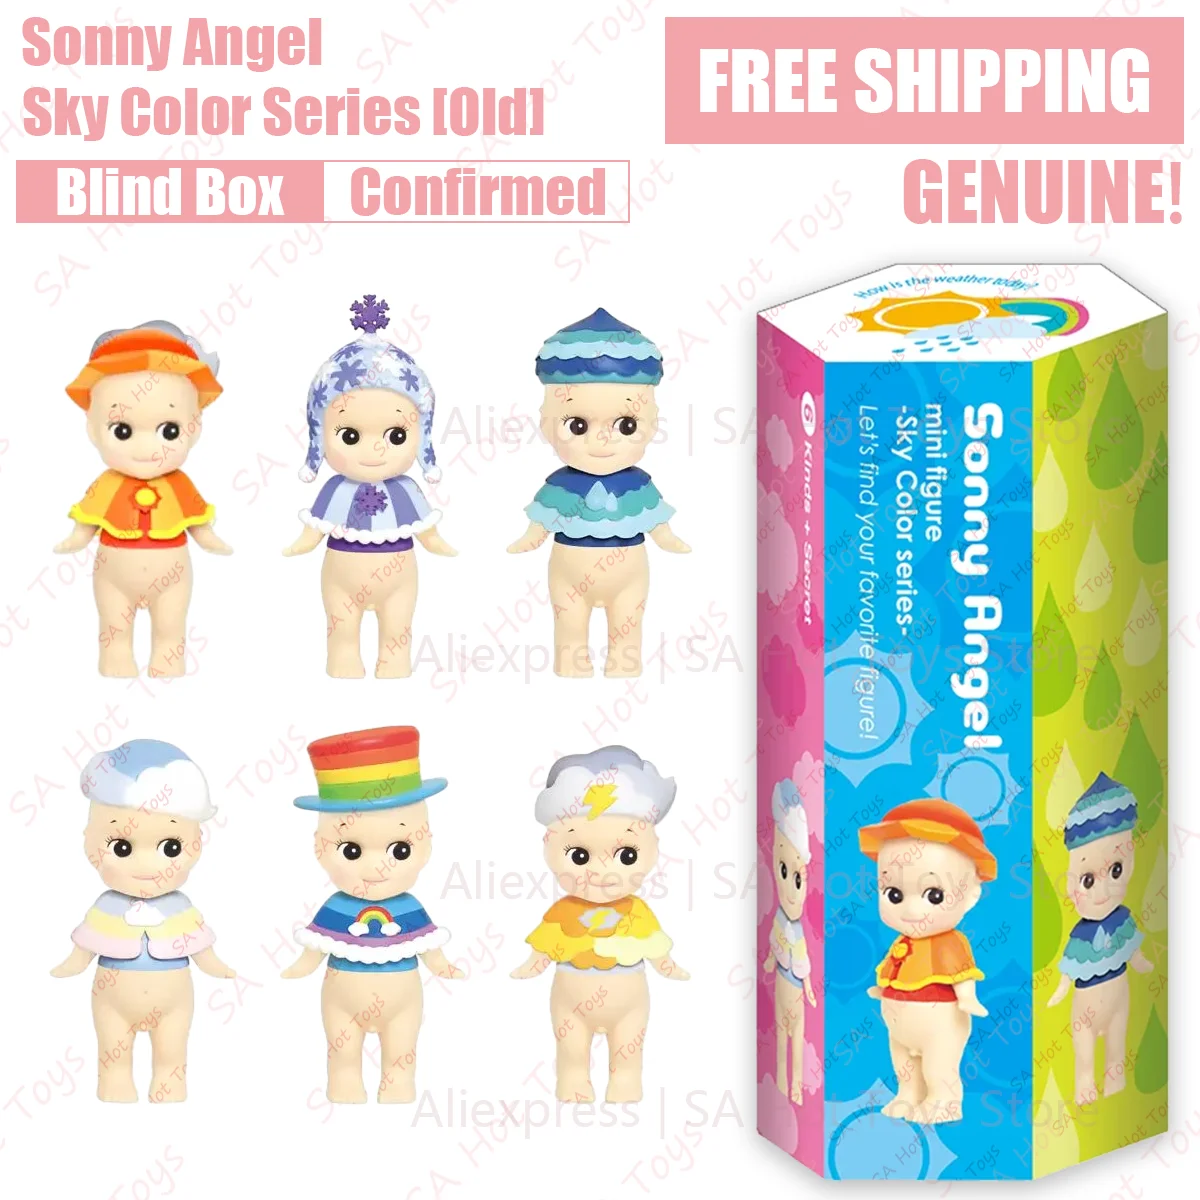 

Sonny Angel weather Series Blind Box Confirmed style Genuine telephone Screen Decoration Birthday Gift Mysterious Surpris